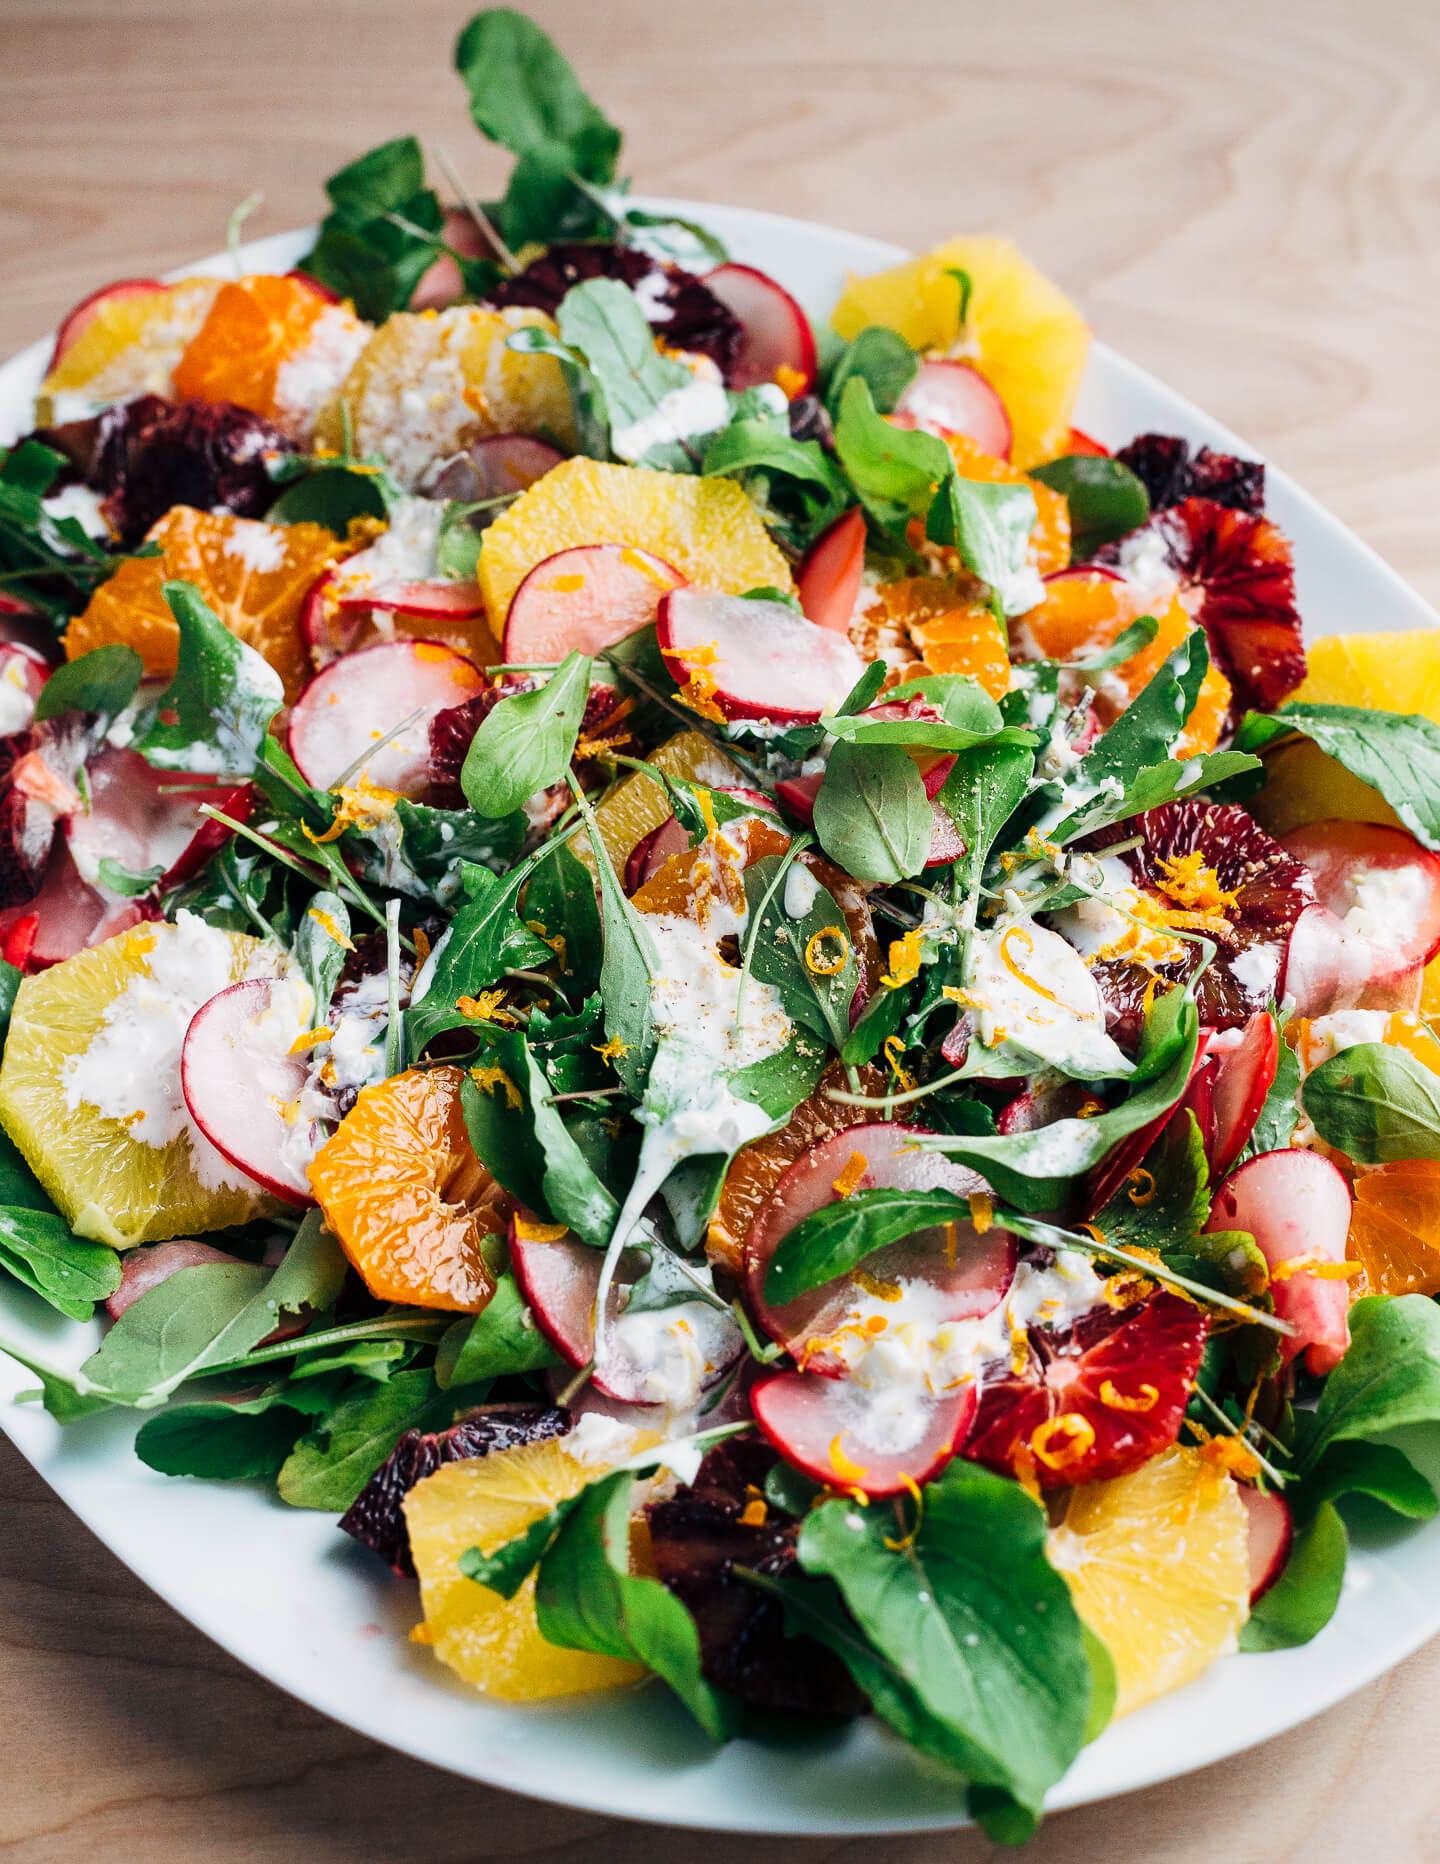 A wintry orange and arugula salad scattered with citrus-marinated radishes and drizzled with creamy buttermilk ranch dressing.